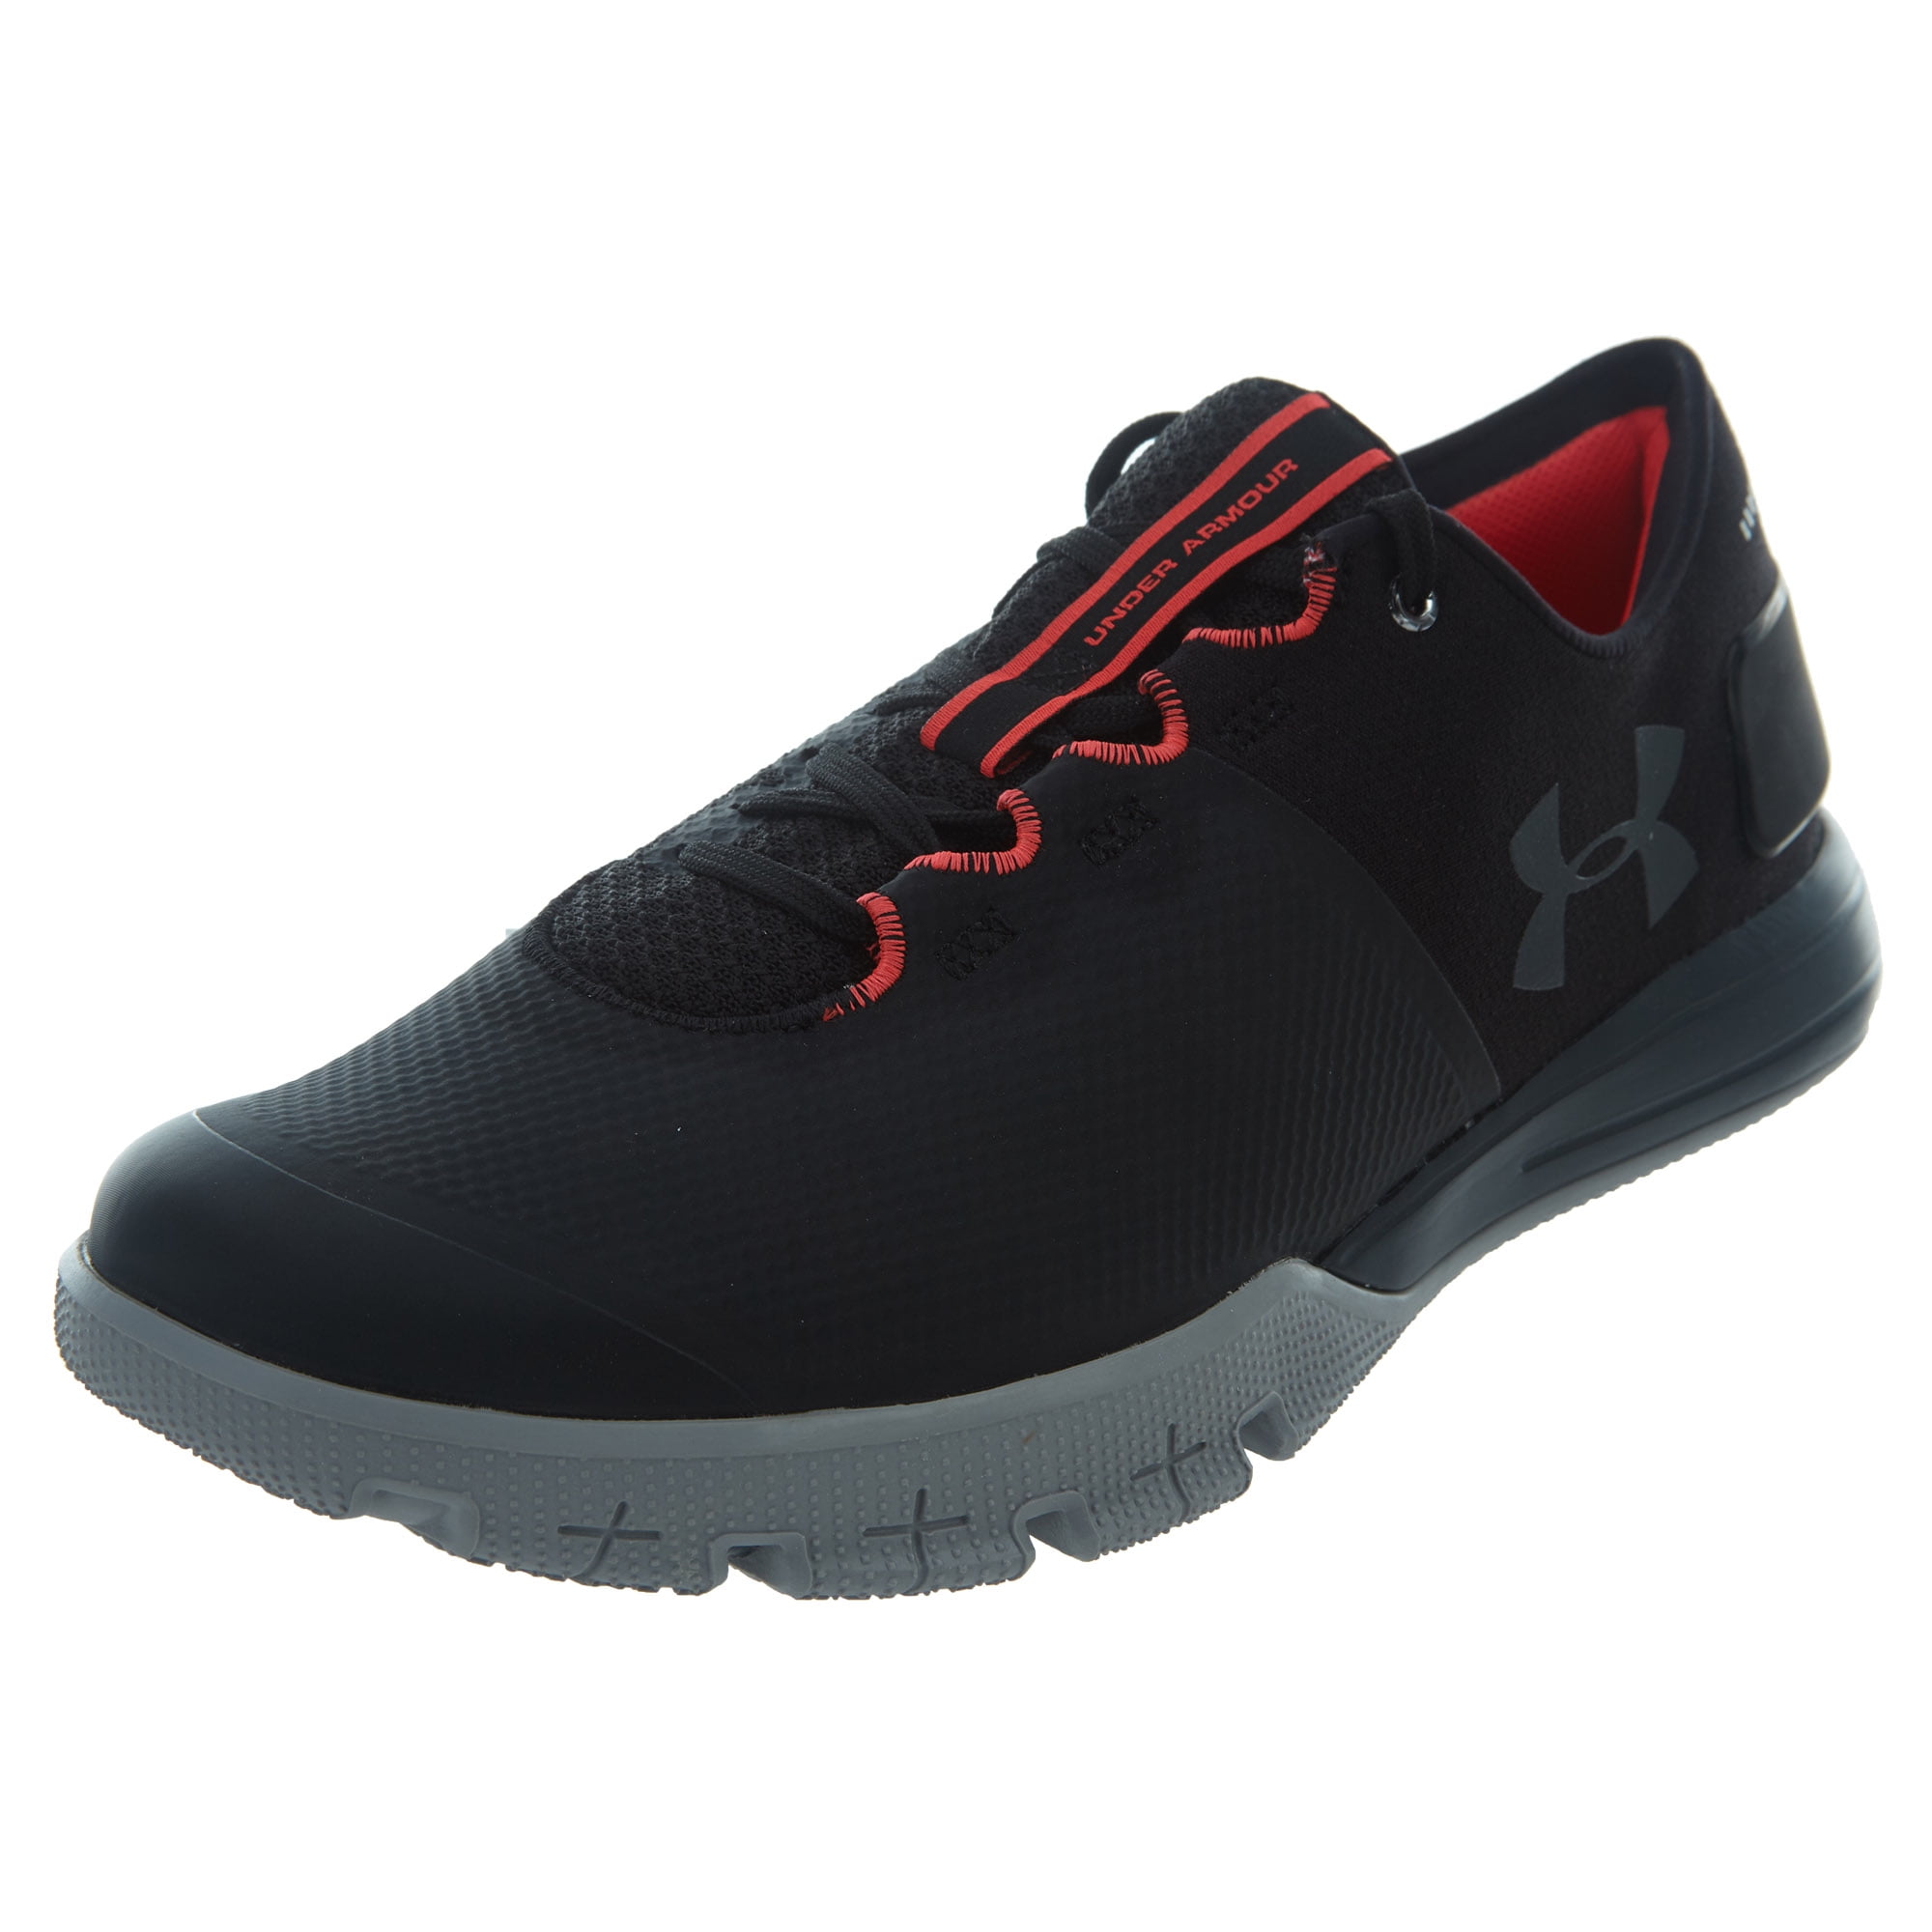 Underarmour Charged Ultimate 2.0 Mens Style : 1285648 - Walmart.com